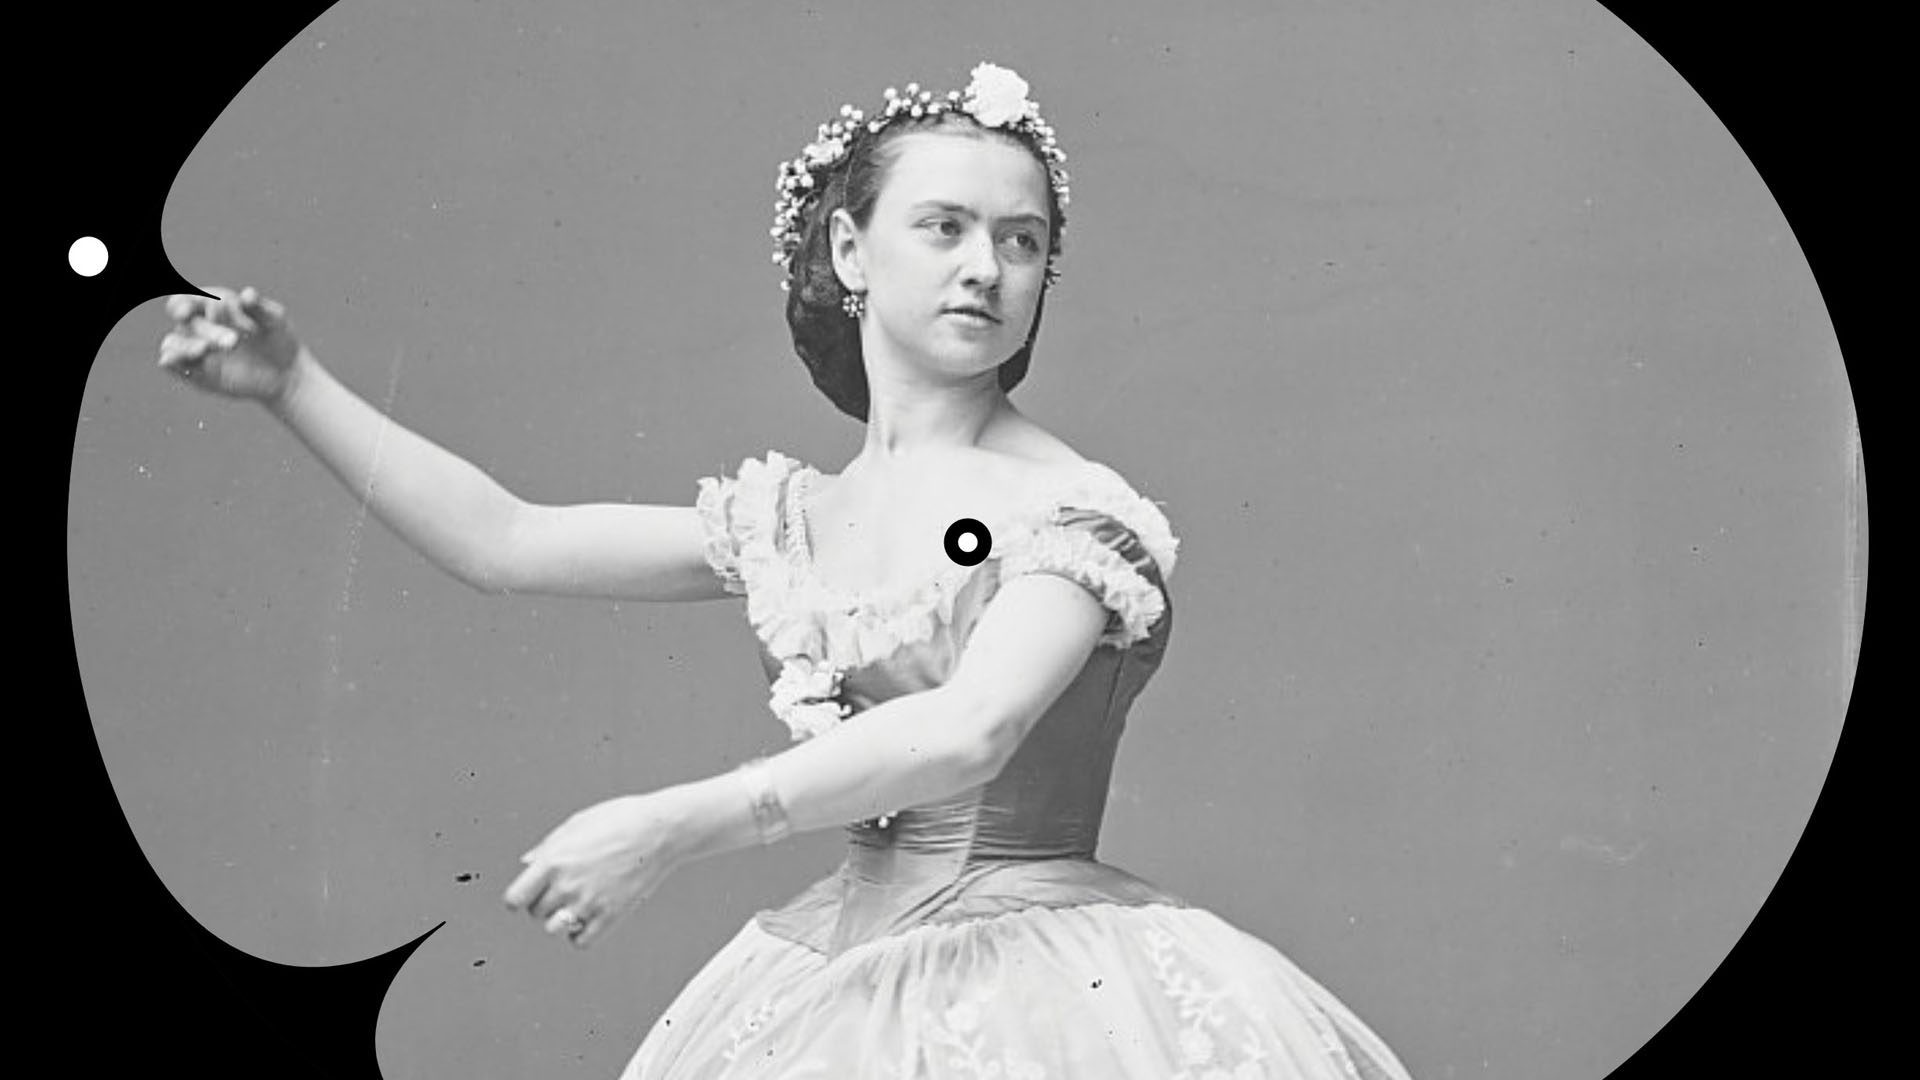 smithsonian image of ballerina with minute hand identified by angle of her arms